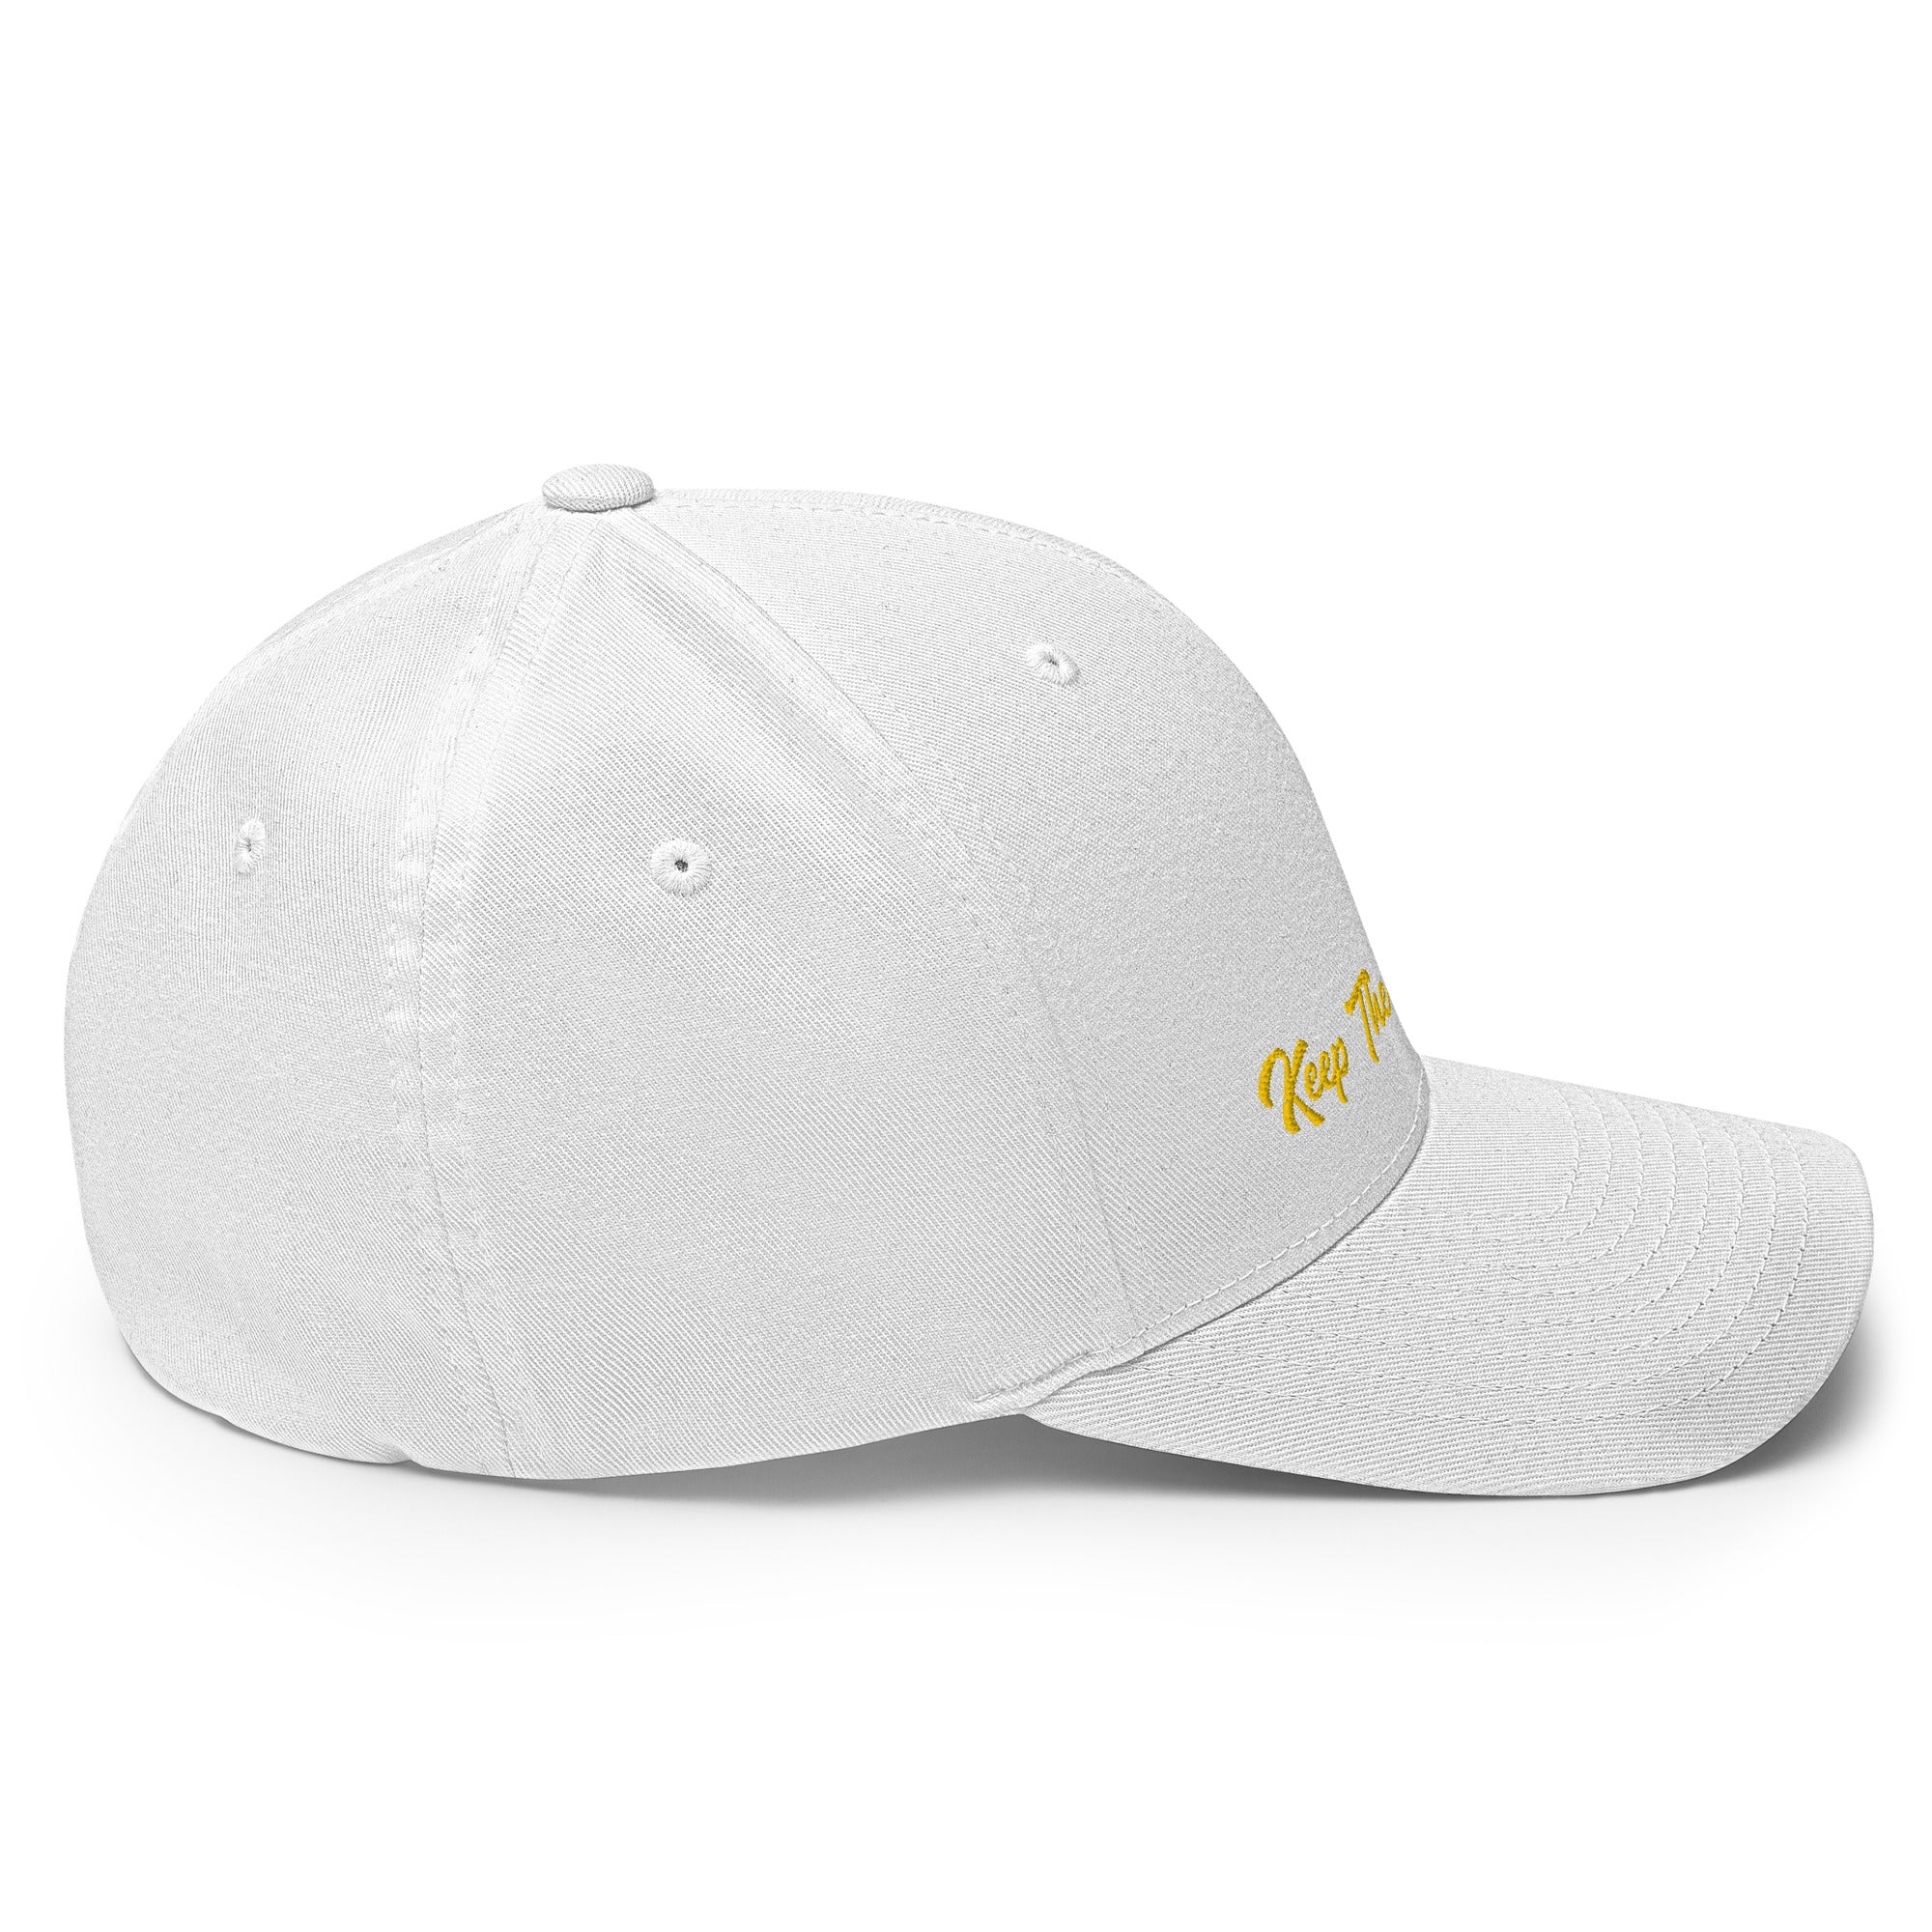 Structured Twill Cap Keep The Sea Clean Gold